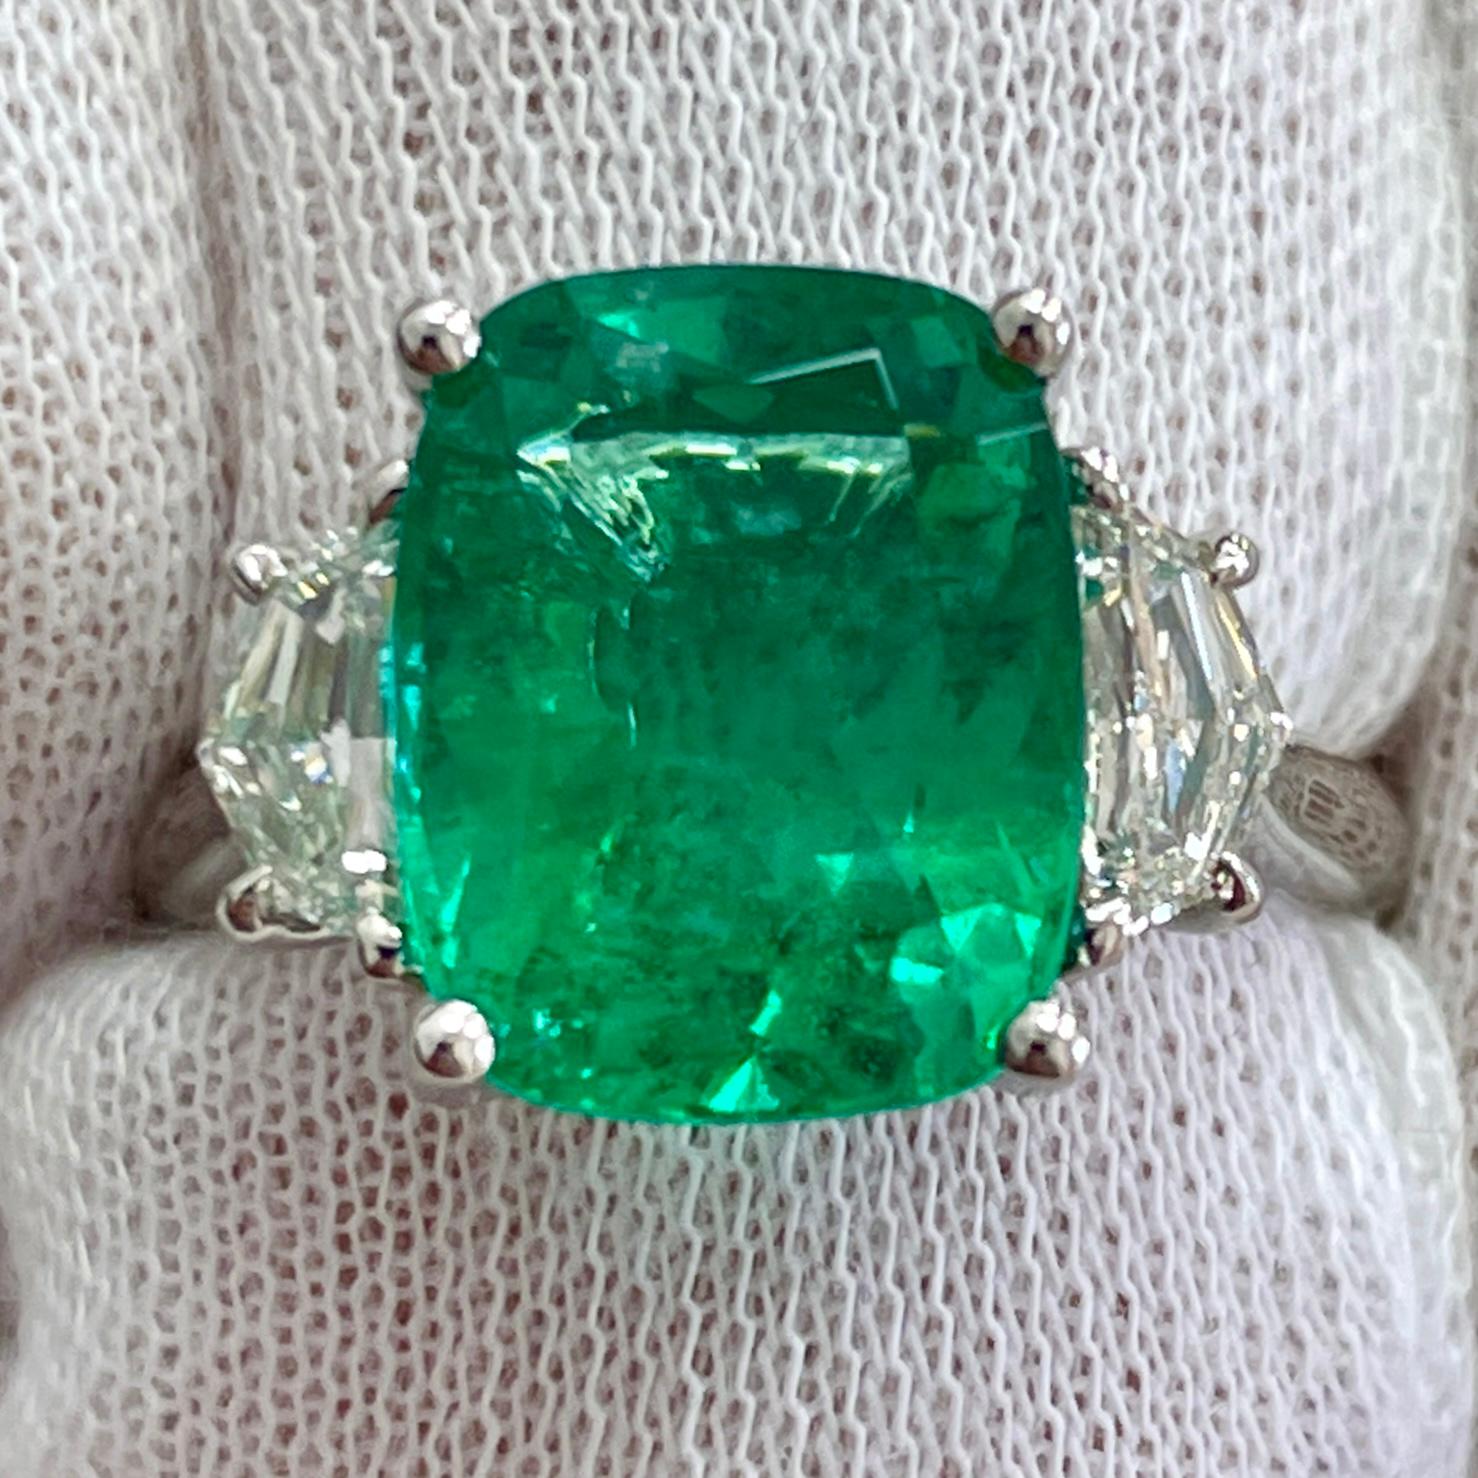 This is a BREATHTAKING emerald mined in Zambia with a very pleasant green color, mounted in an elegant platinum and diamond ring with 0.66carats of brilliant white diamonds. Suitable for any occasion!